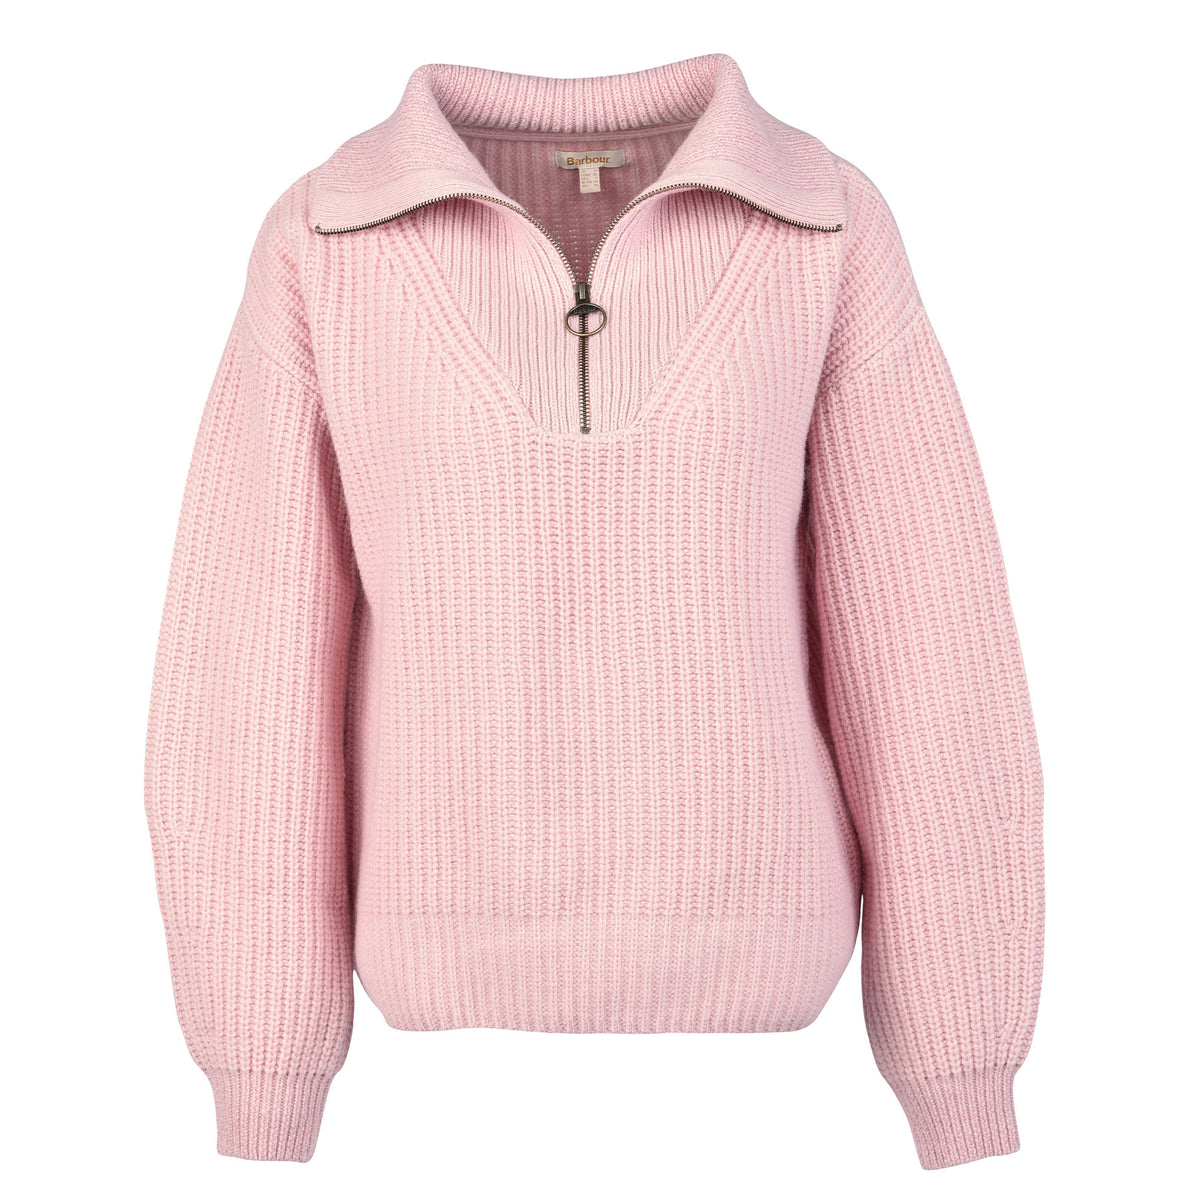 Hero image featuring the Barbour Stavia 3/4 pullover Knit in light pink with a brass zipper.